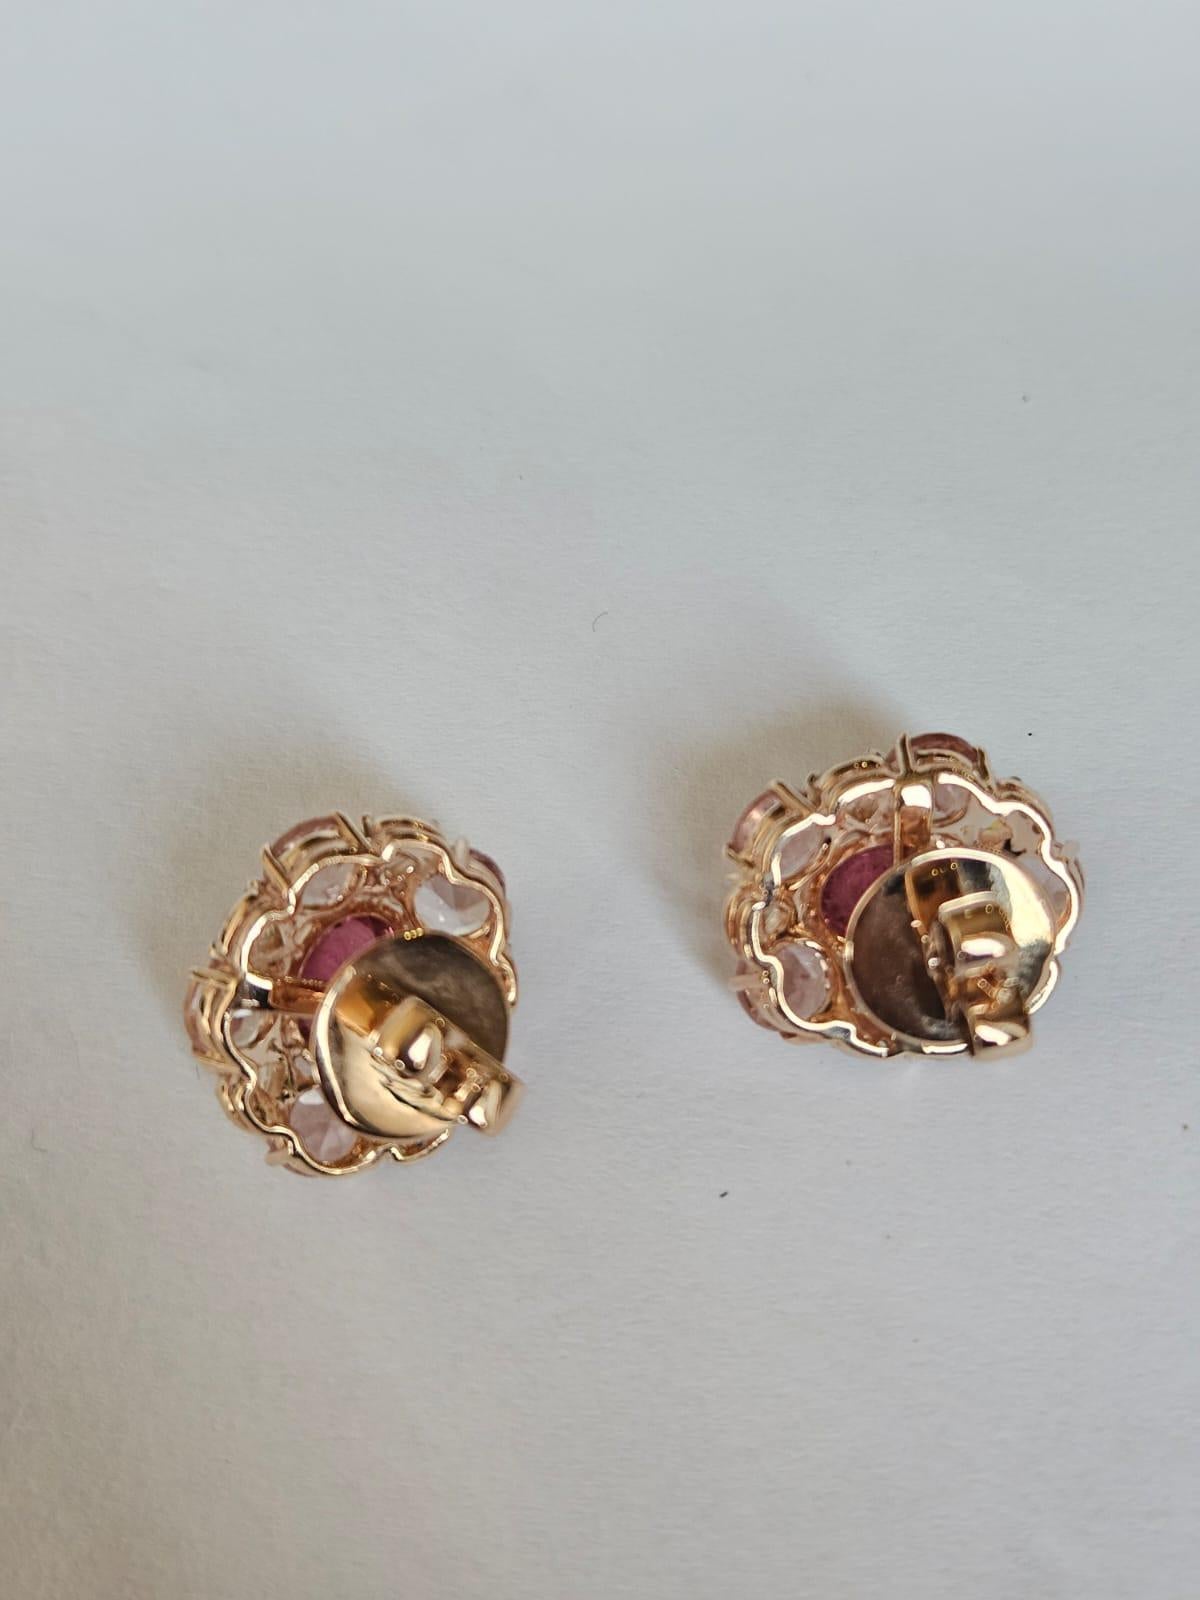 A very gorgeous and special, art deco style, Tourmaline & Morganite Stud Earrings set in 18K Rose Gold & Diamonds. The weight of the Tourmaline Cabochons is 5.58 grams. The weight of the Morganites is 4.78 grams. The combined Diamonds weight is 1.19